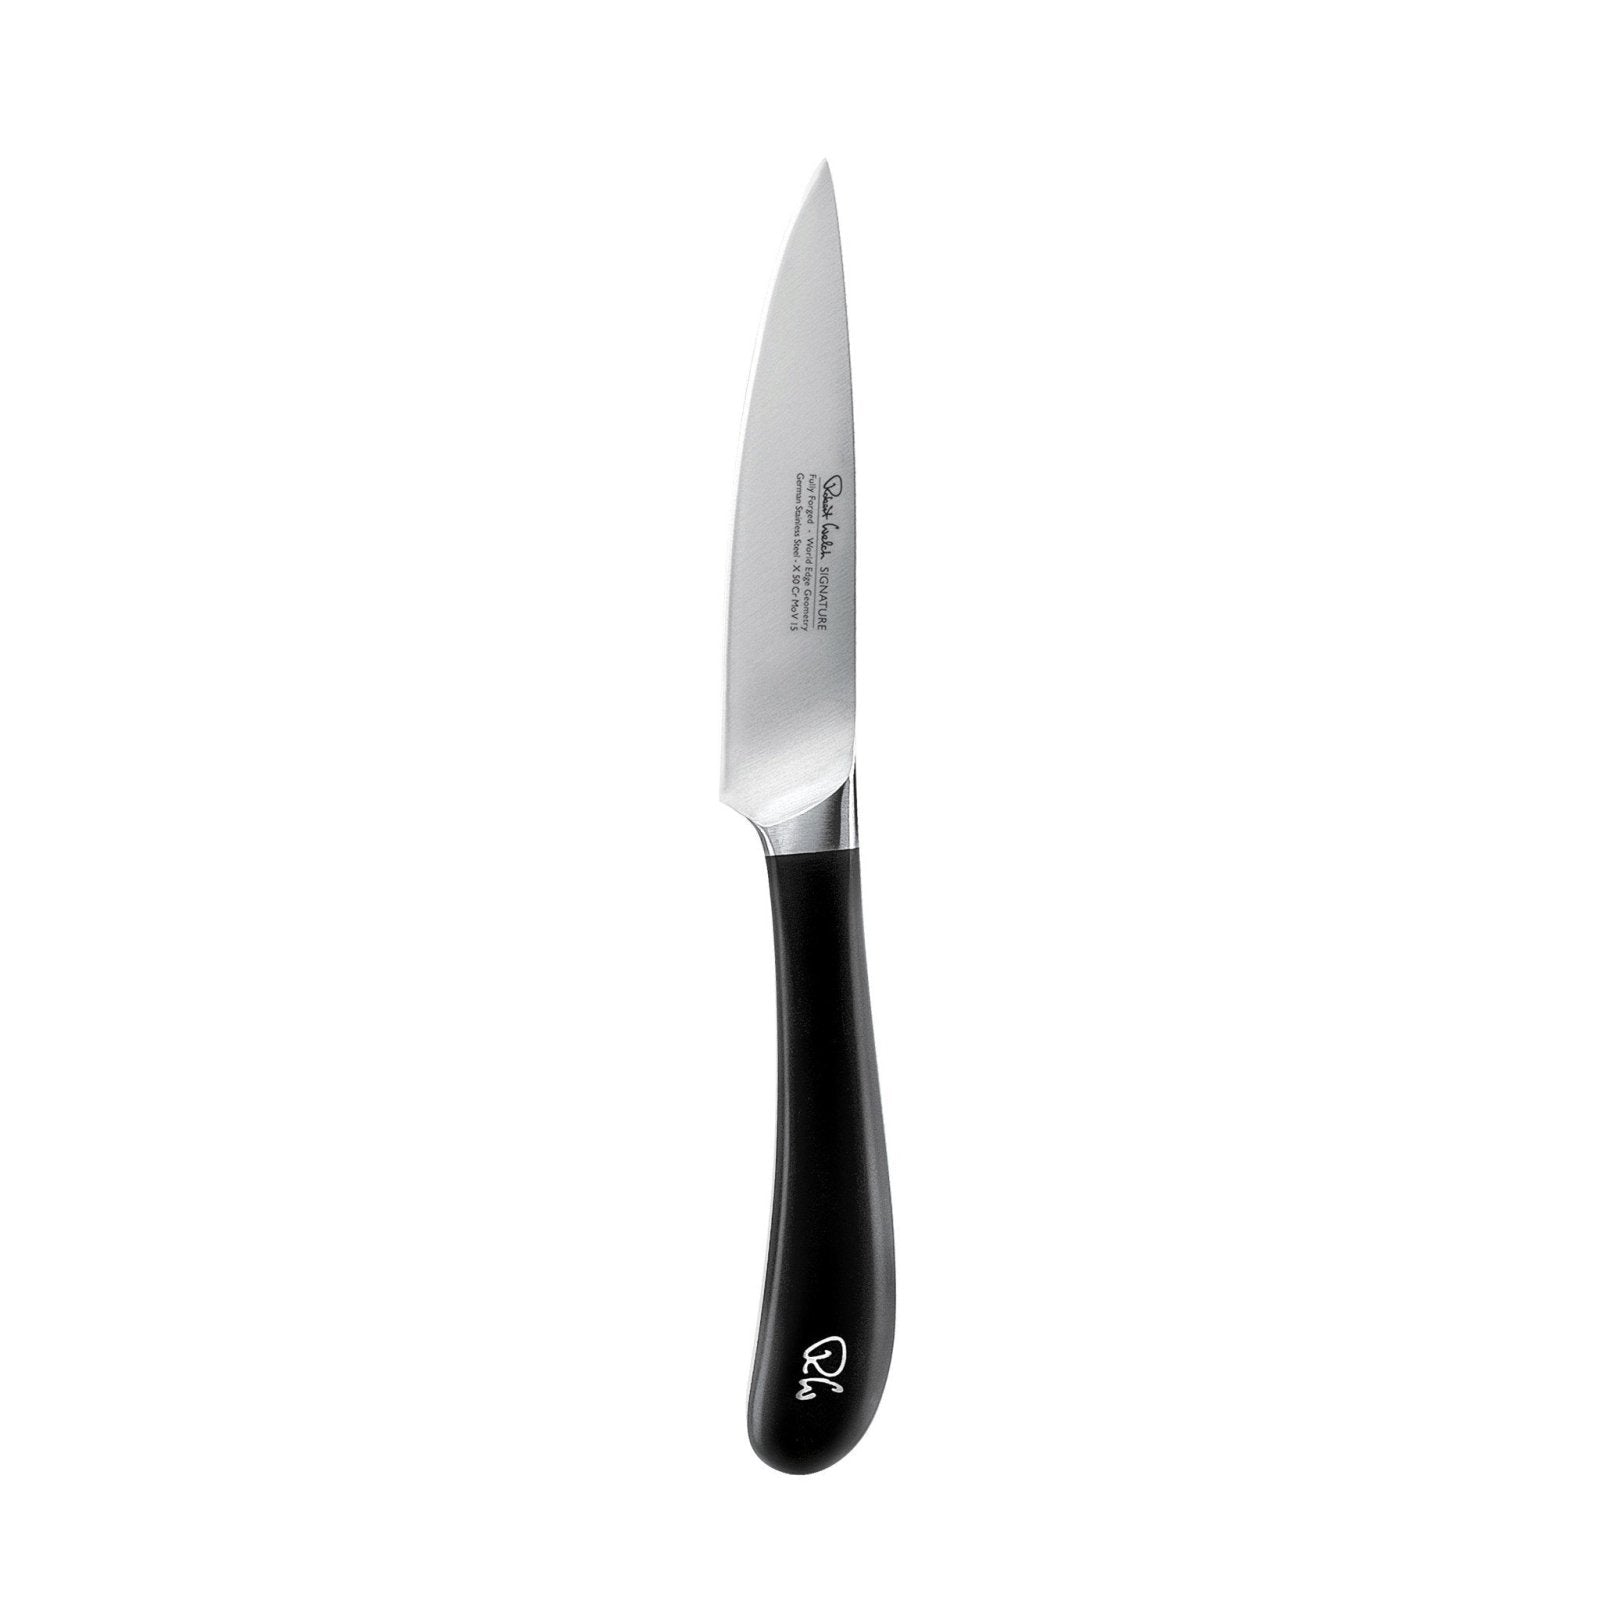 Robert Welch Signature 10cm Vegetable / Paring Knife - SIGSA2095V - The Cotswold Knife Company